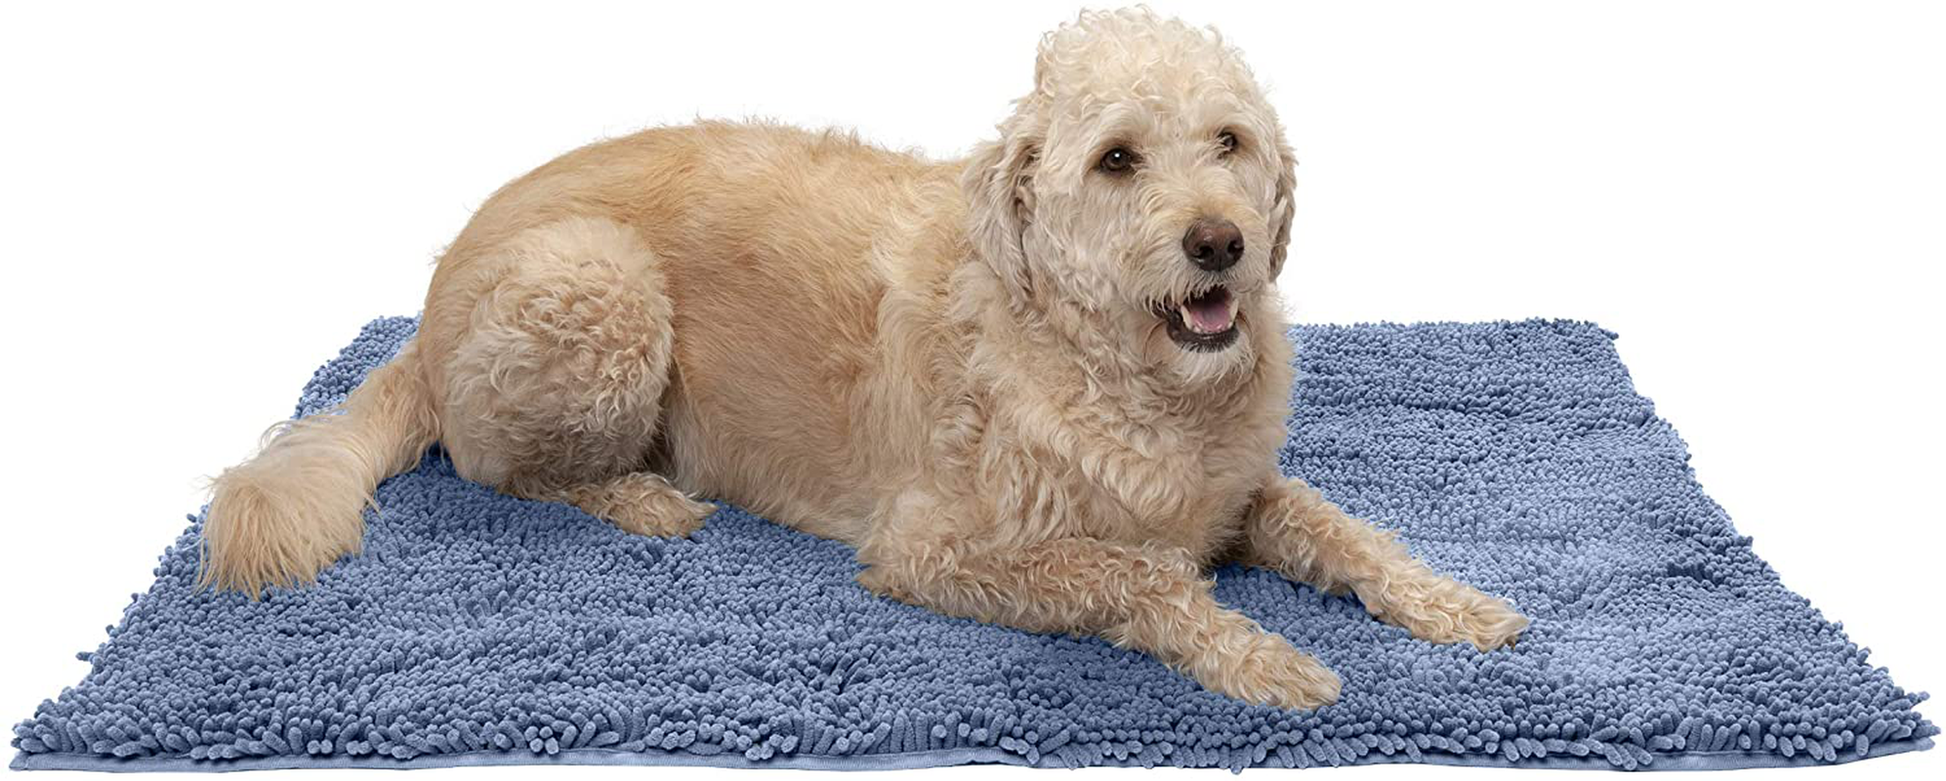 Furhaven Pet Products - Thermanap Cat Bed Pad, Thermanap Dog Blanket Mat, Self-Warming Waterproof Throw Blanket, Muddy Paws Absorbent Towel Floor Rug, and More Animals & Pet Supplies > Pet Supplies > Cat Supplies > Cat Beds Furhaven   